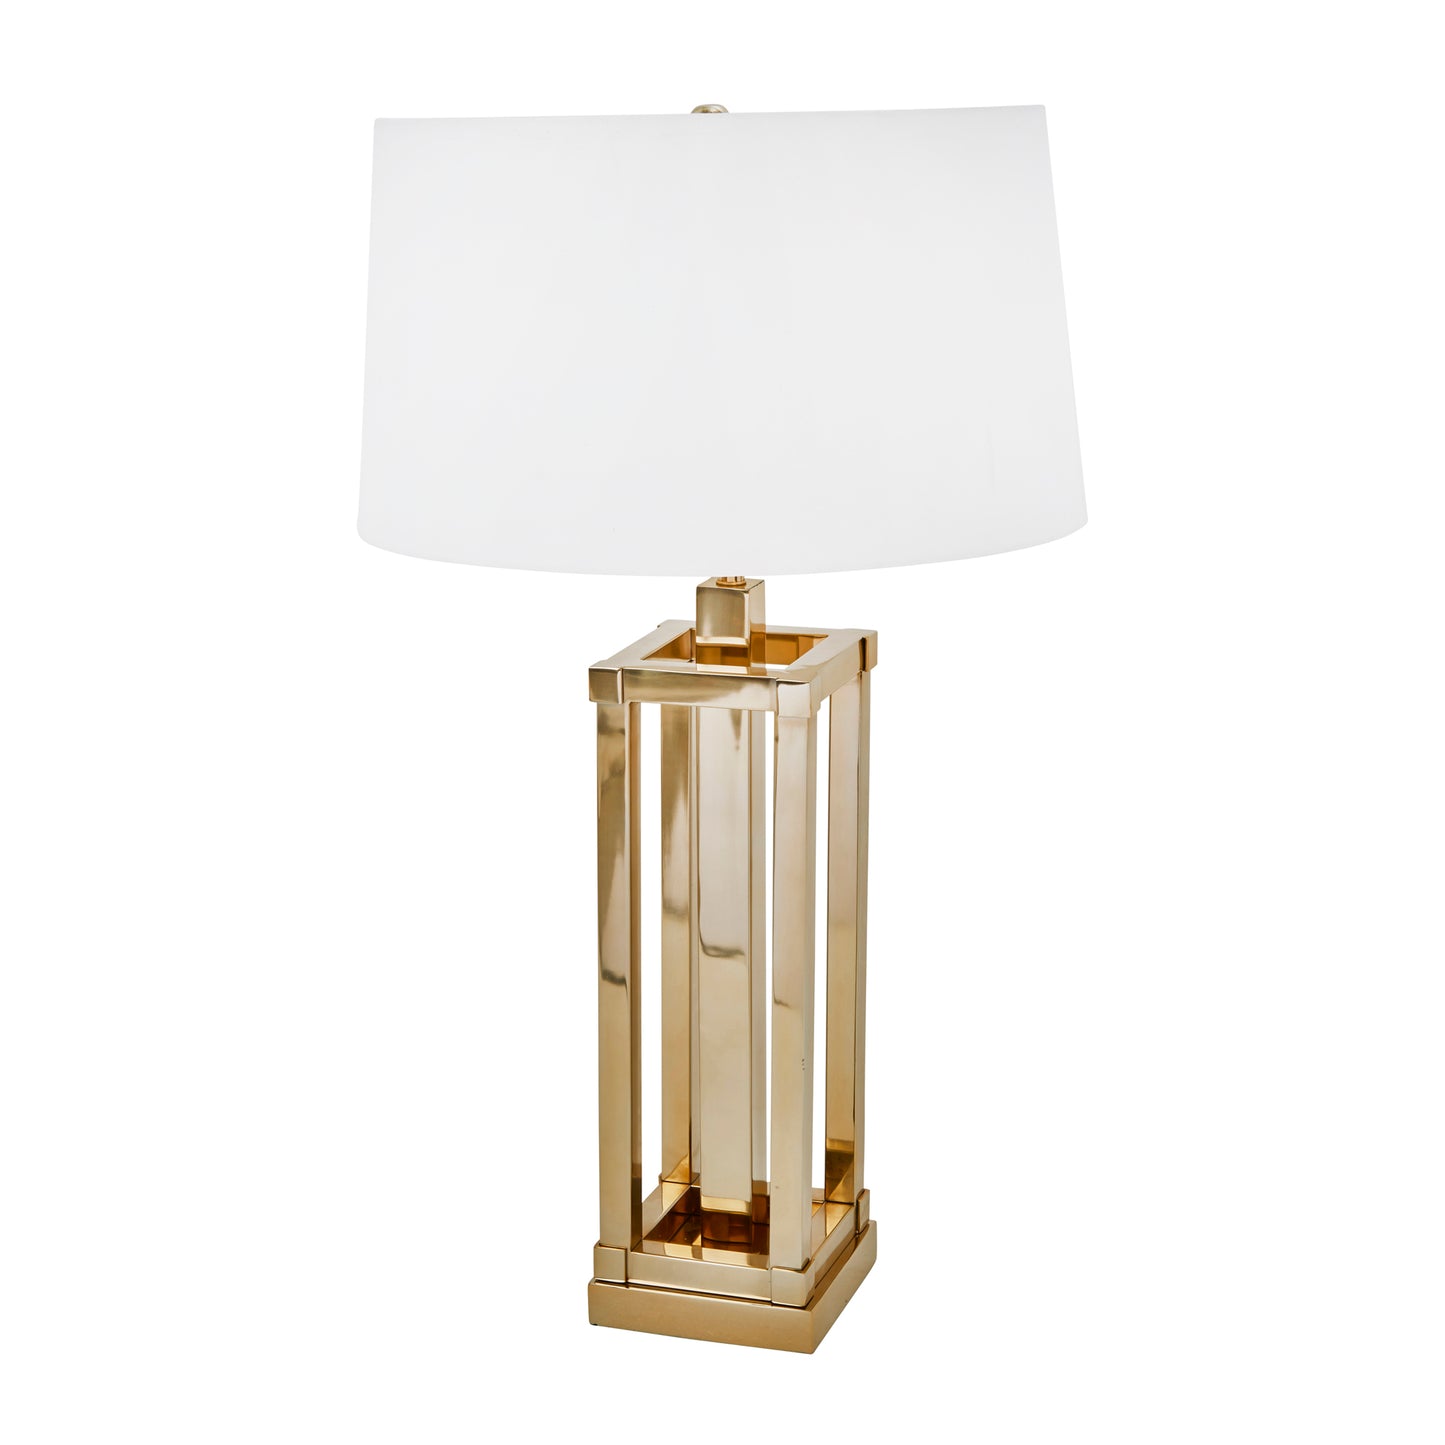 STAINLESS STEEL 27" SQUARE COLUMN TABLE LAMP, GOLD